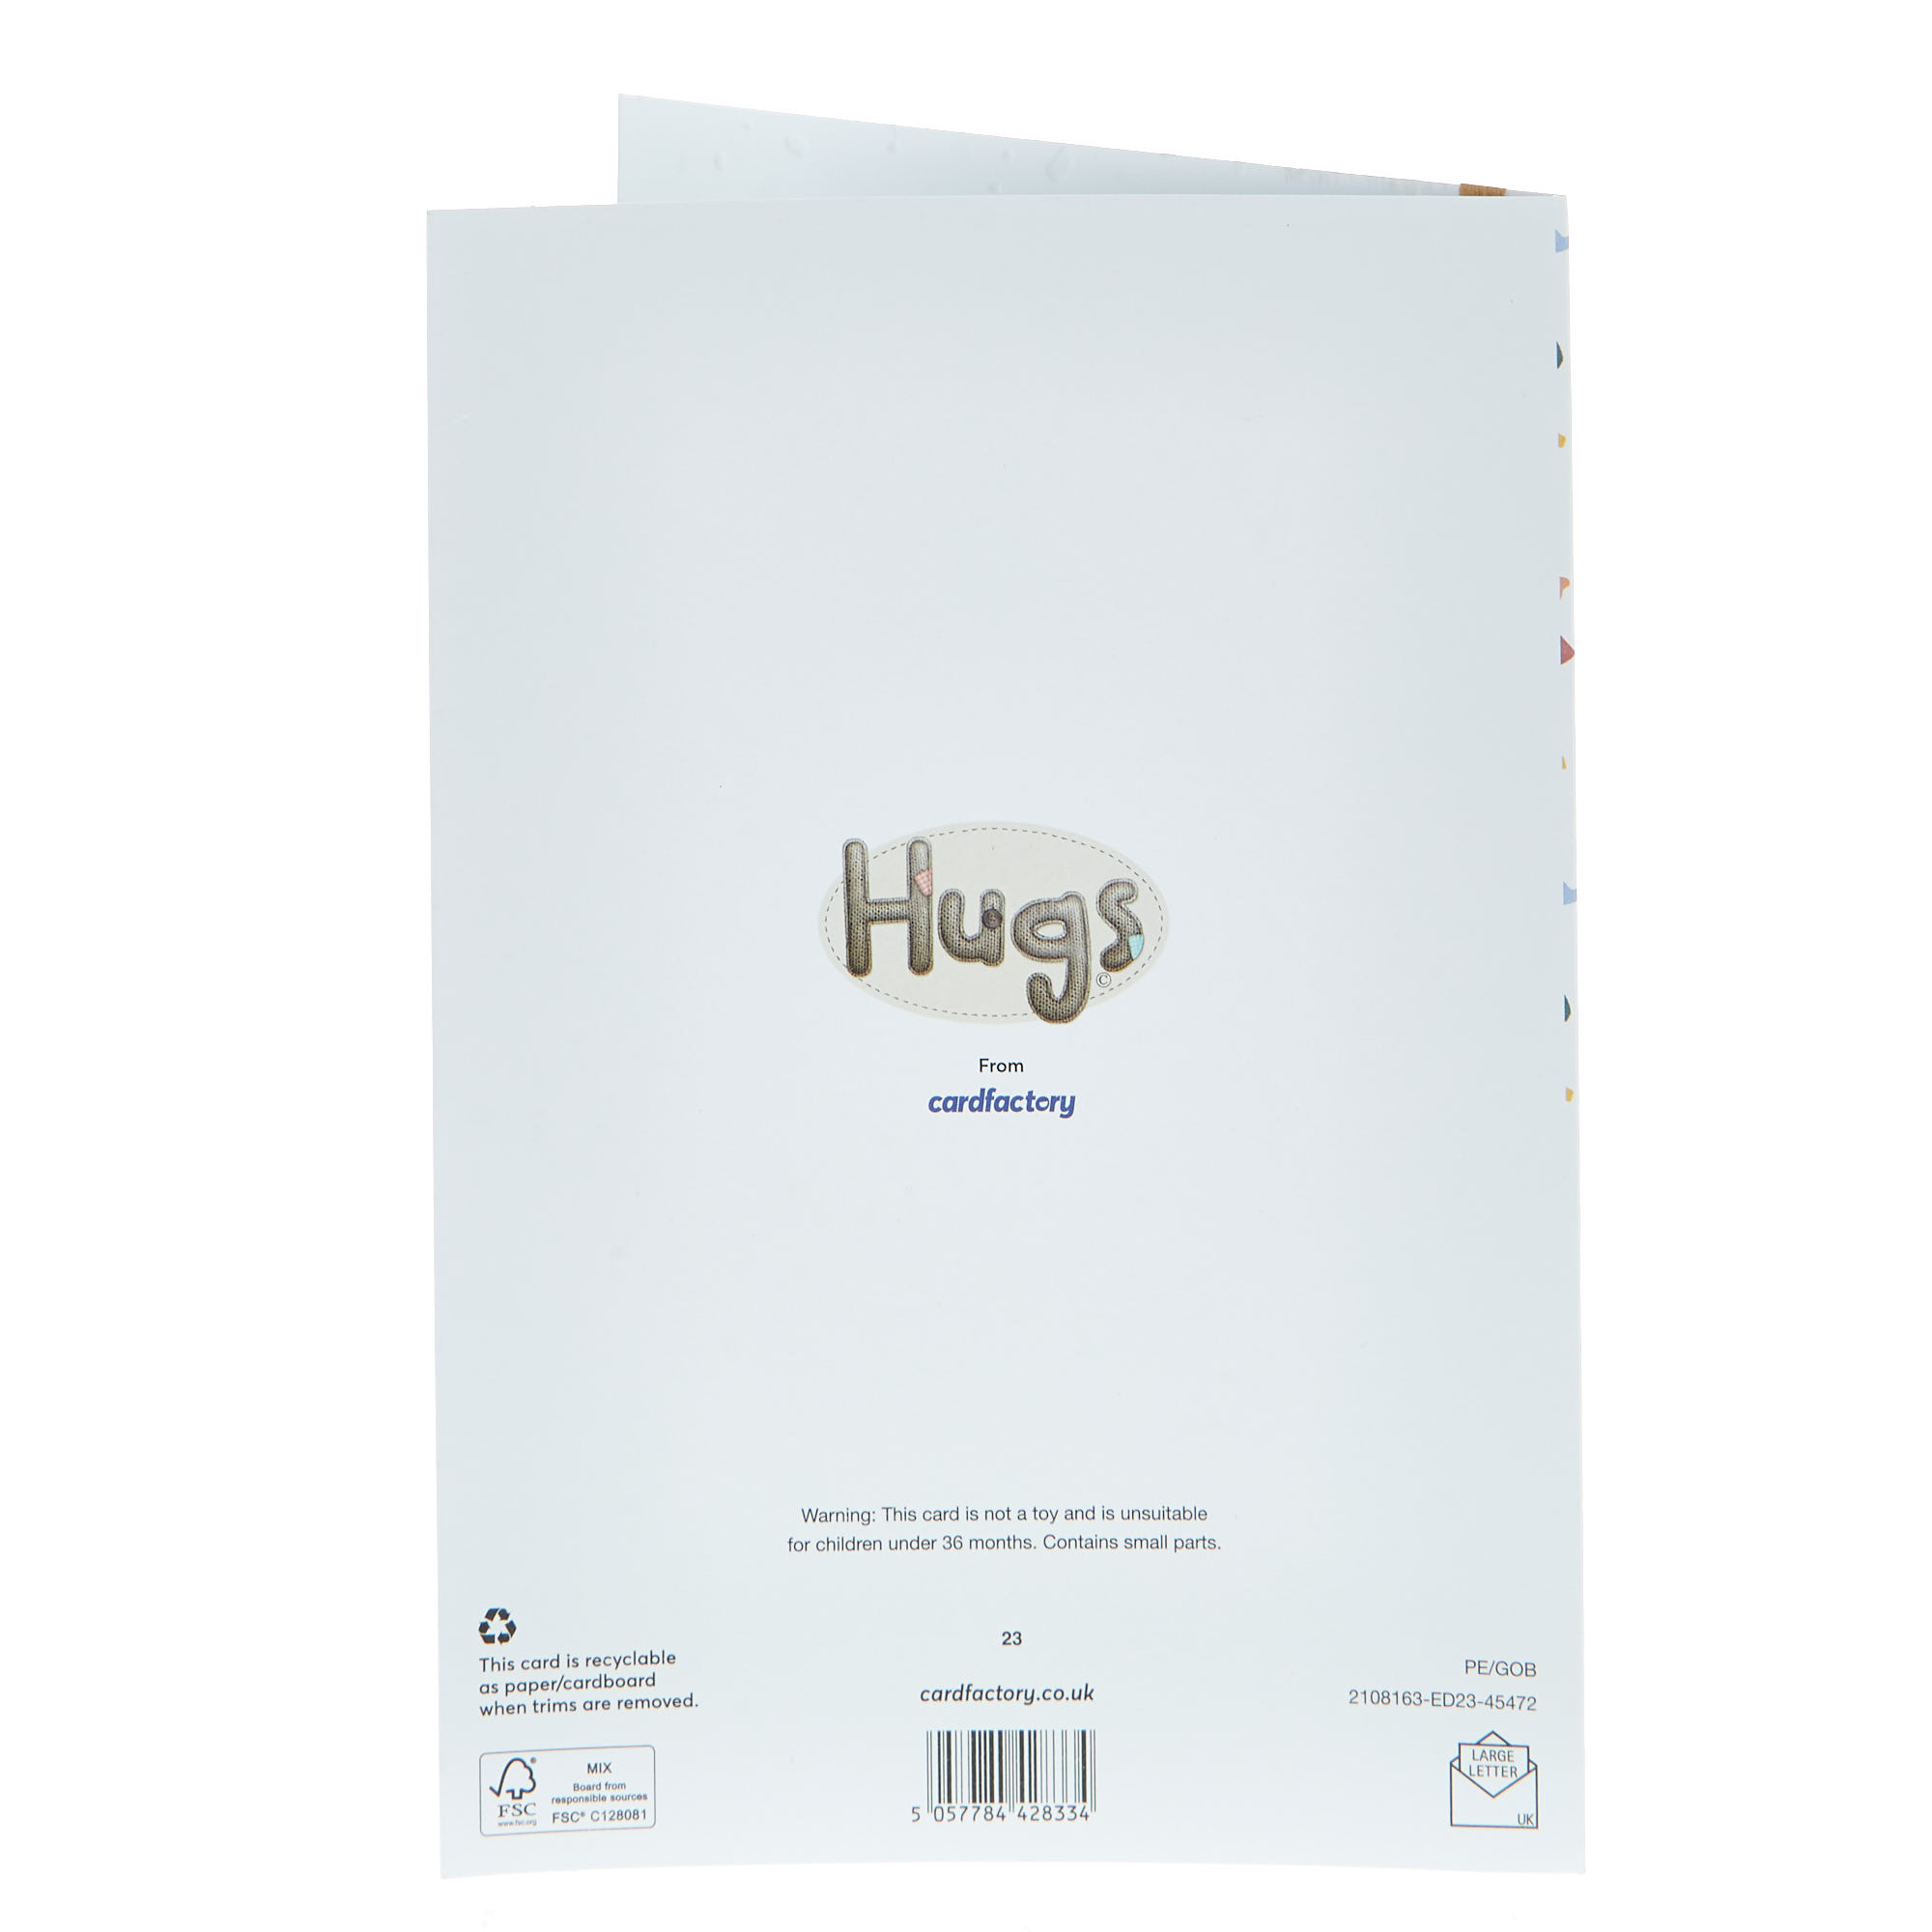 Nephew Just For You Hugs Birthday Card